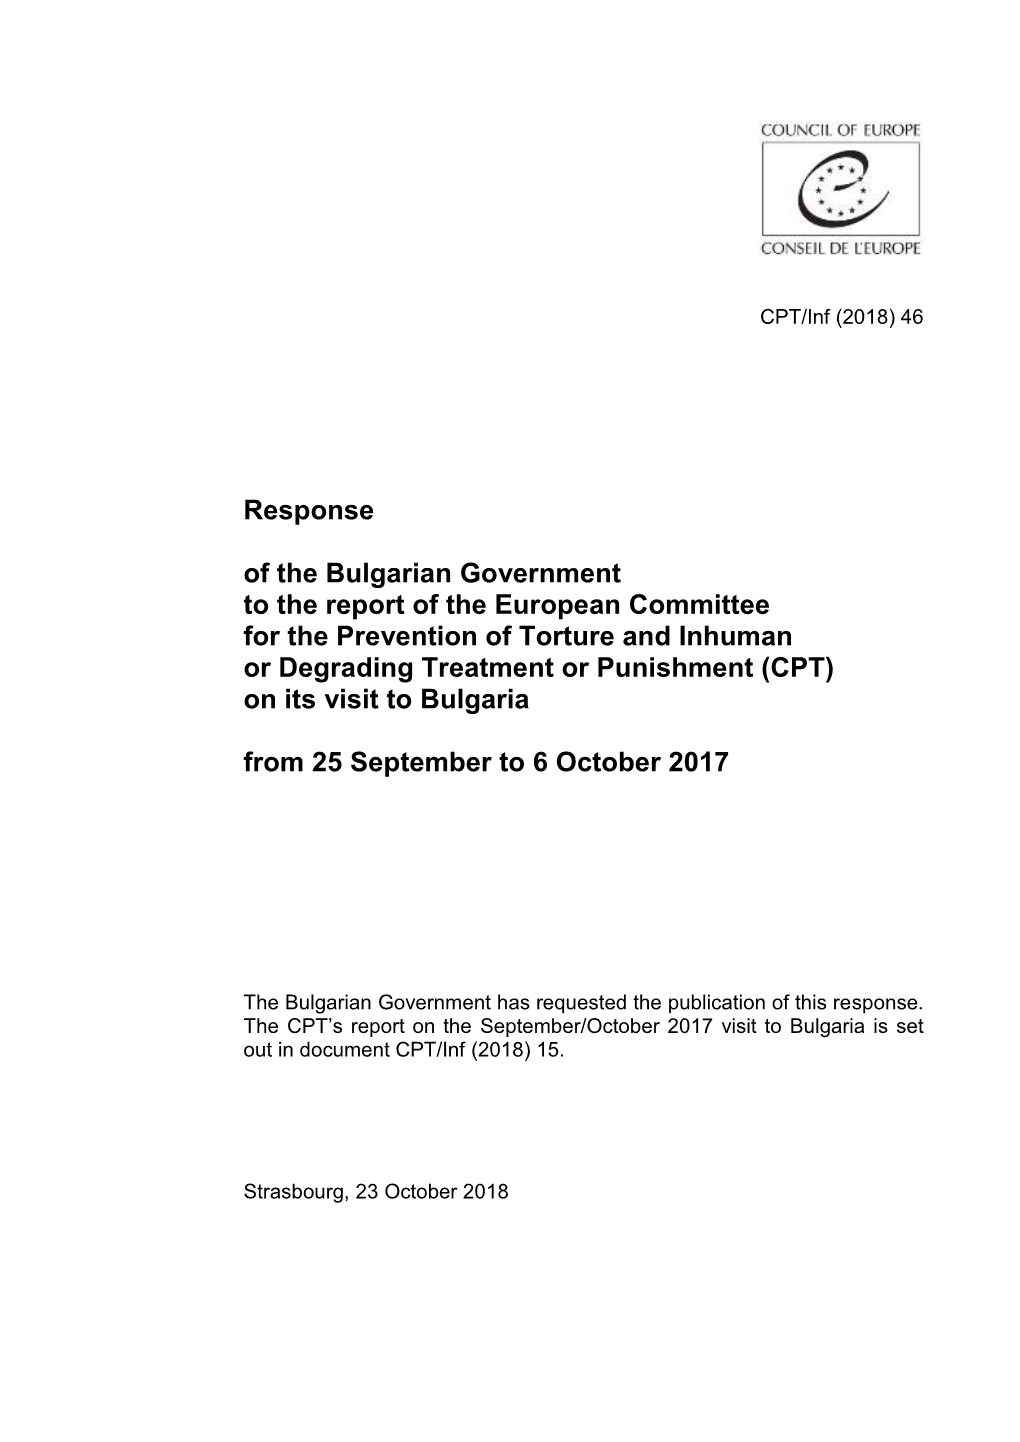 Response of the Bulgarian Government to the Report of The